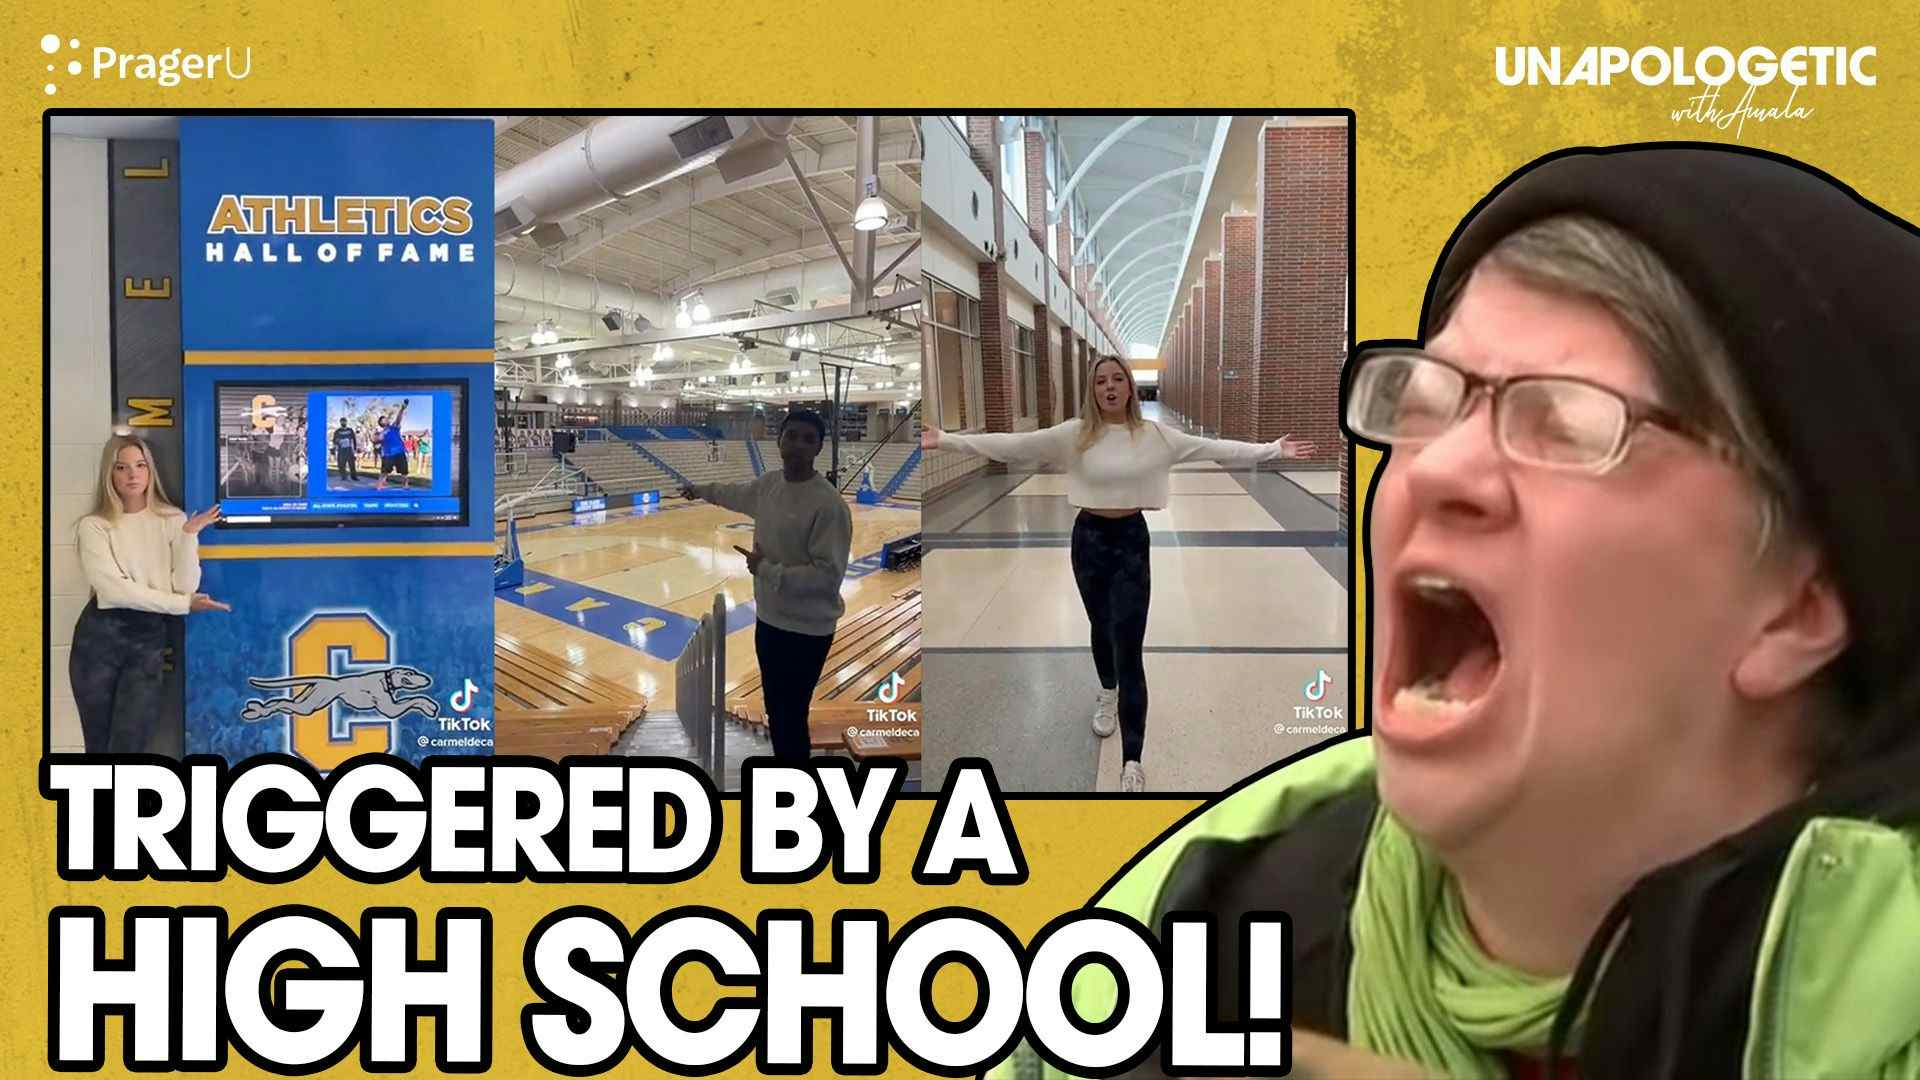 This Viral Video of a High School Has People Raging